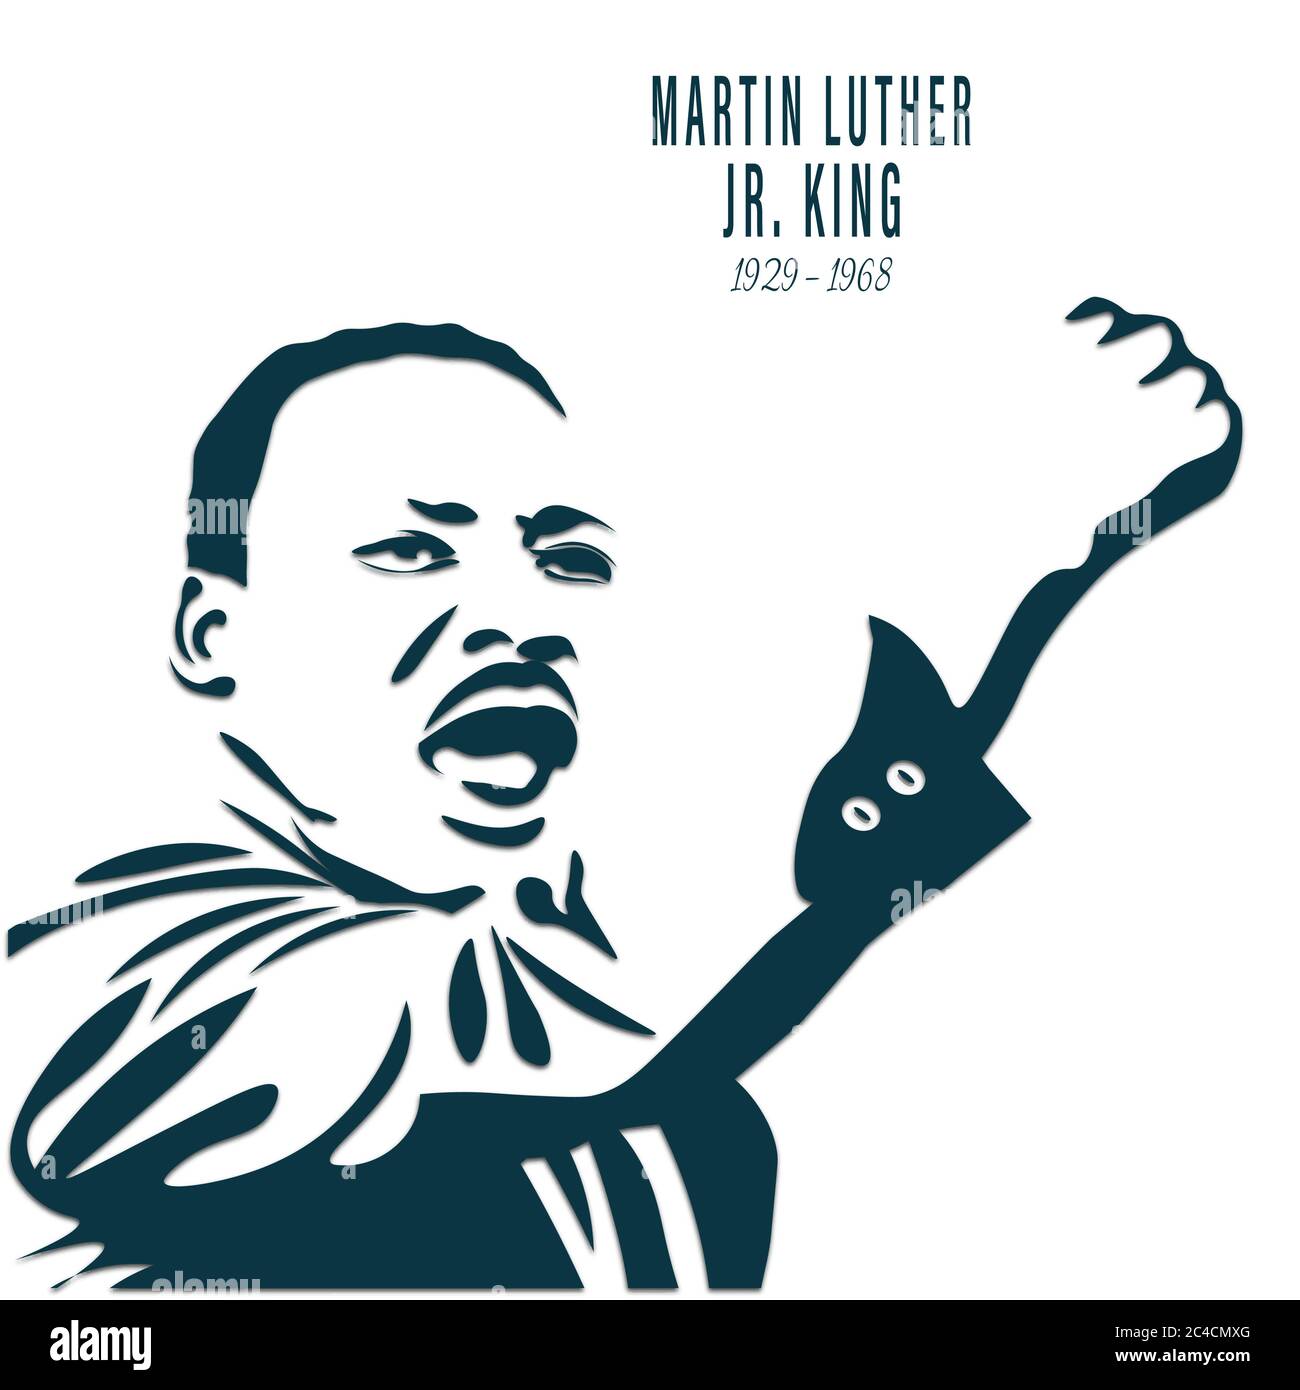 Martin Luther King Jr. Day greeting card background.  I have a dream inspirational quote. Martin Luther Jr. King Portrait Stock Vector